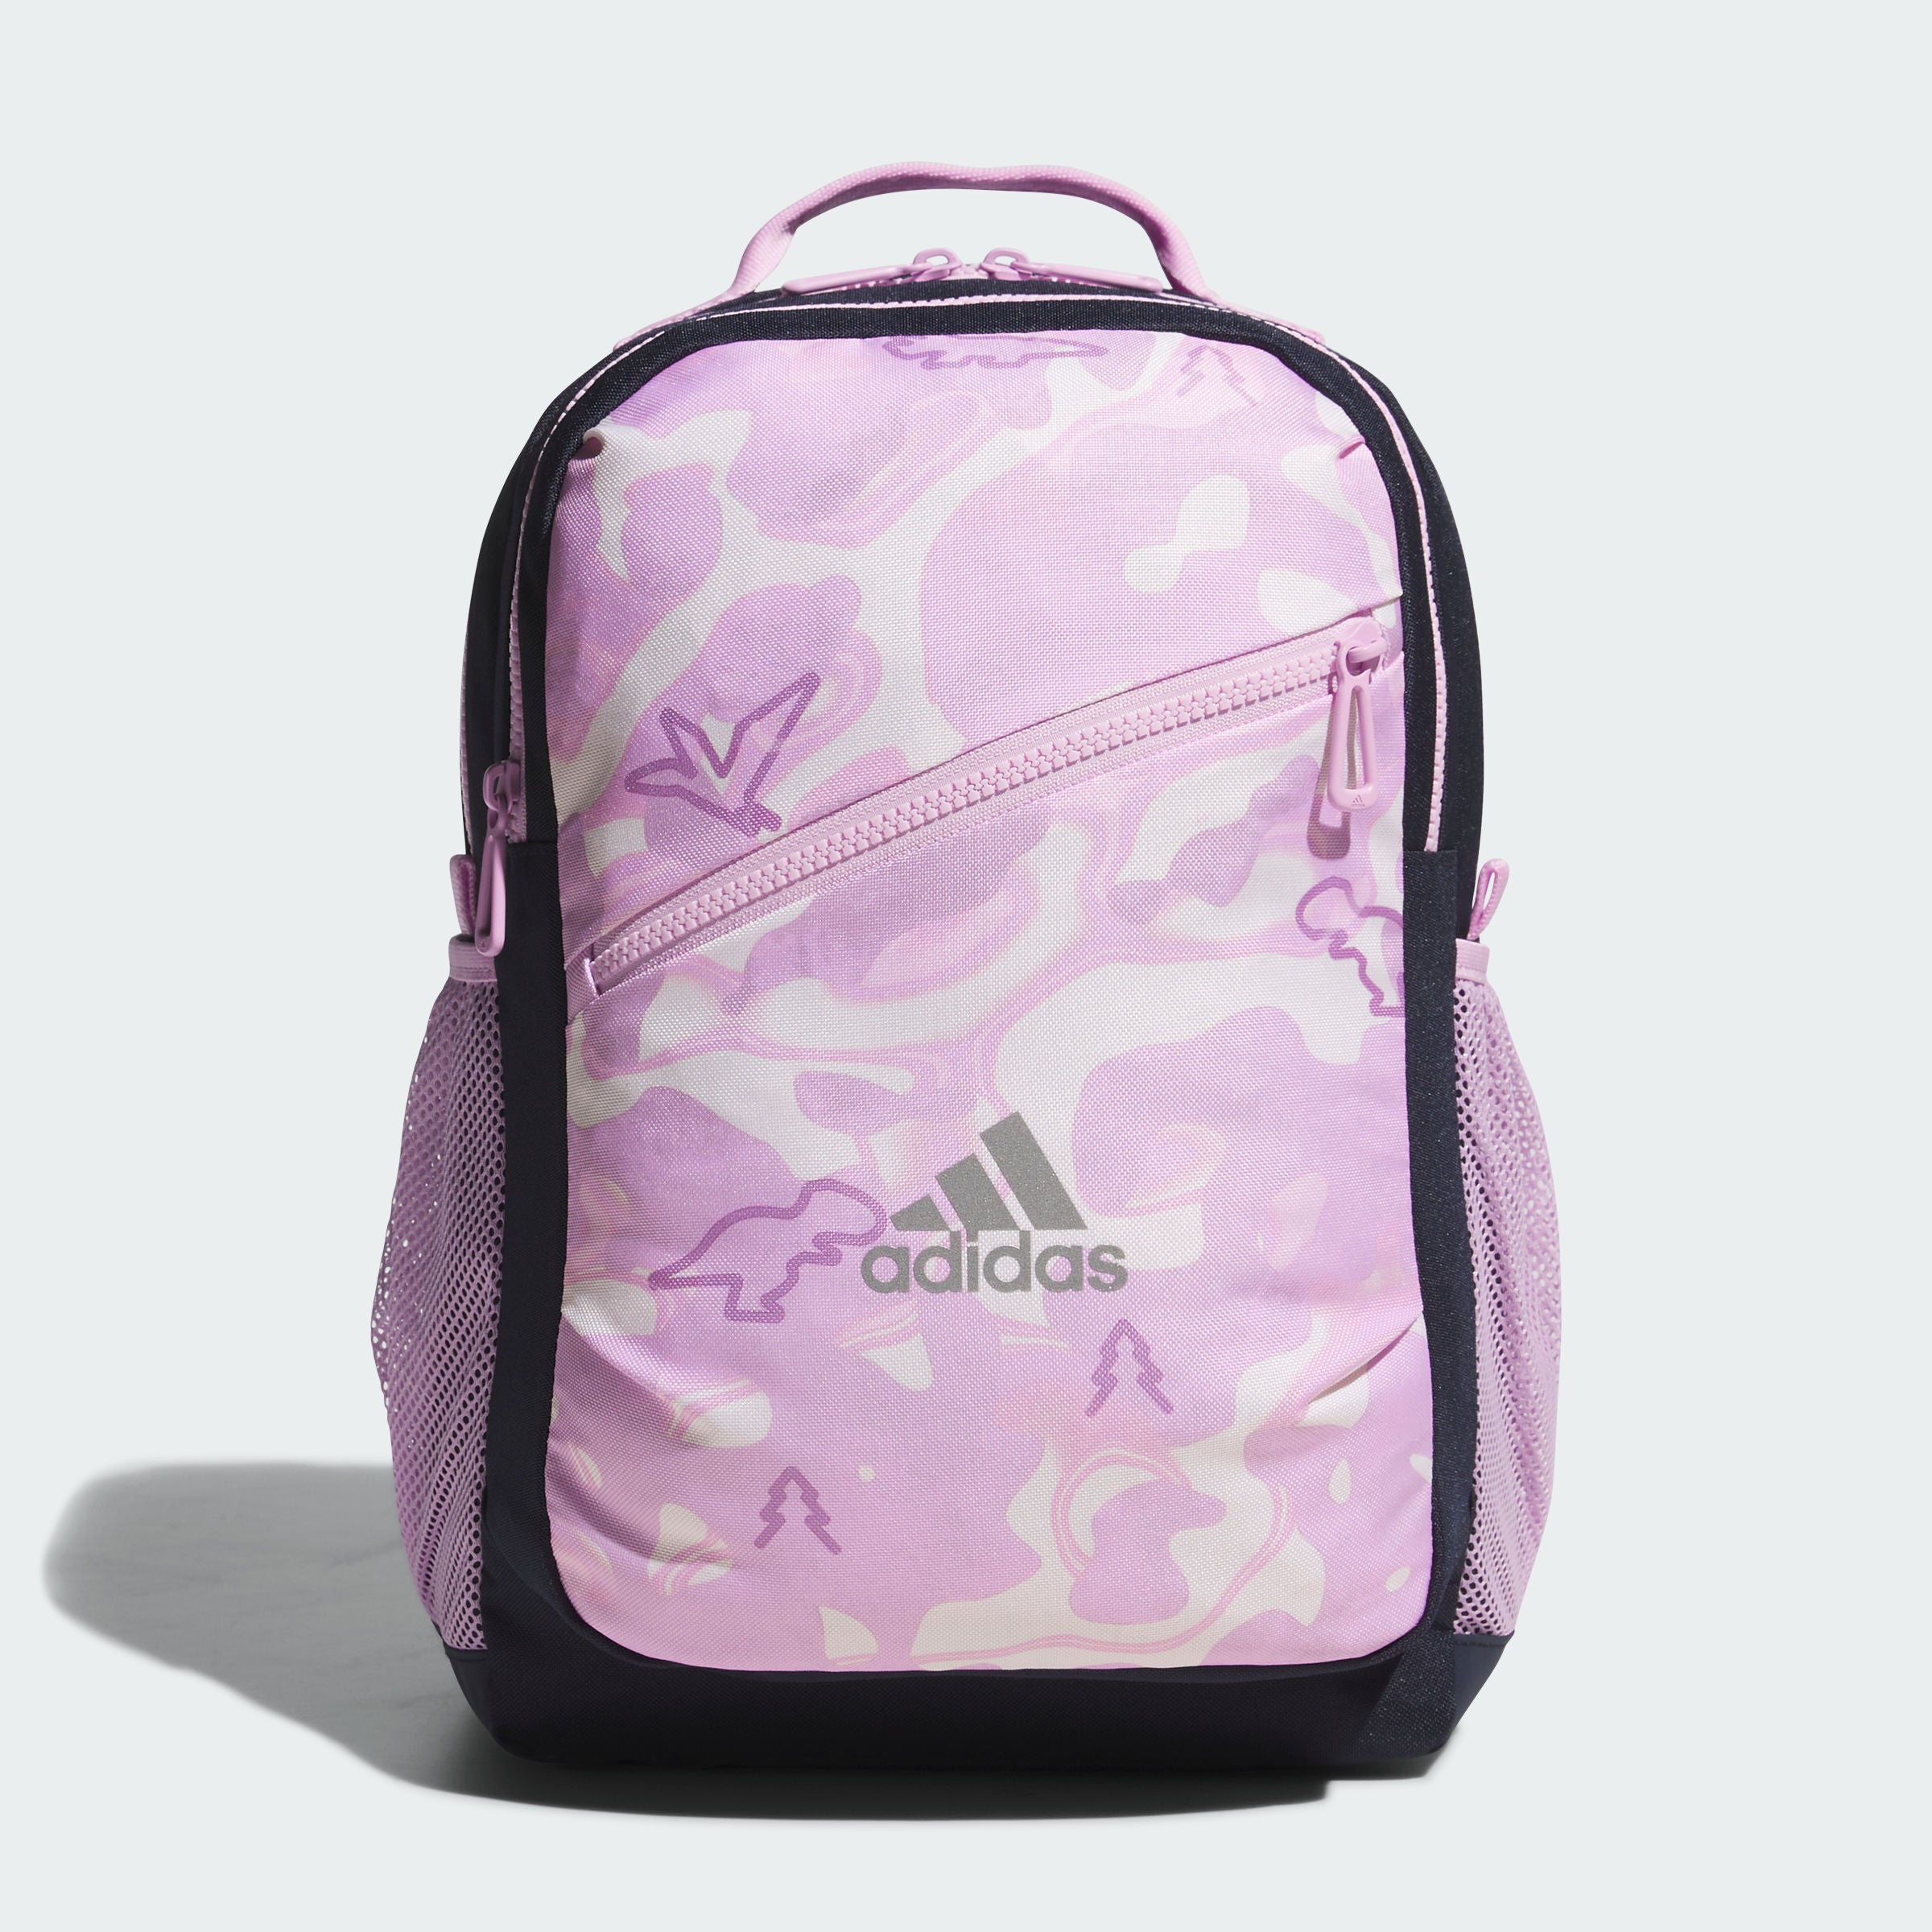  ACC, Adidas, bag,  TRAINING,open for kids